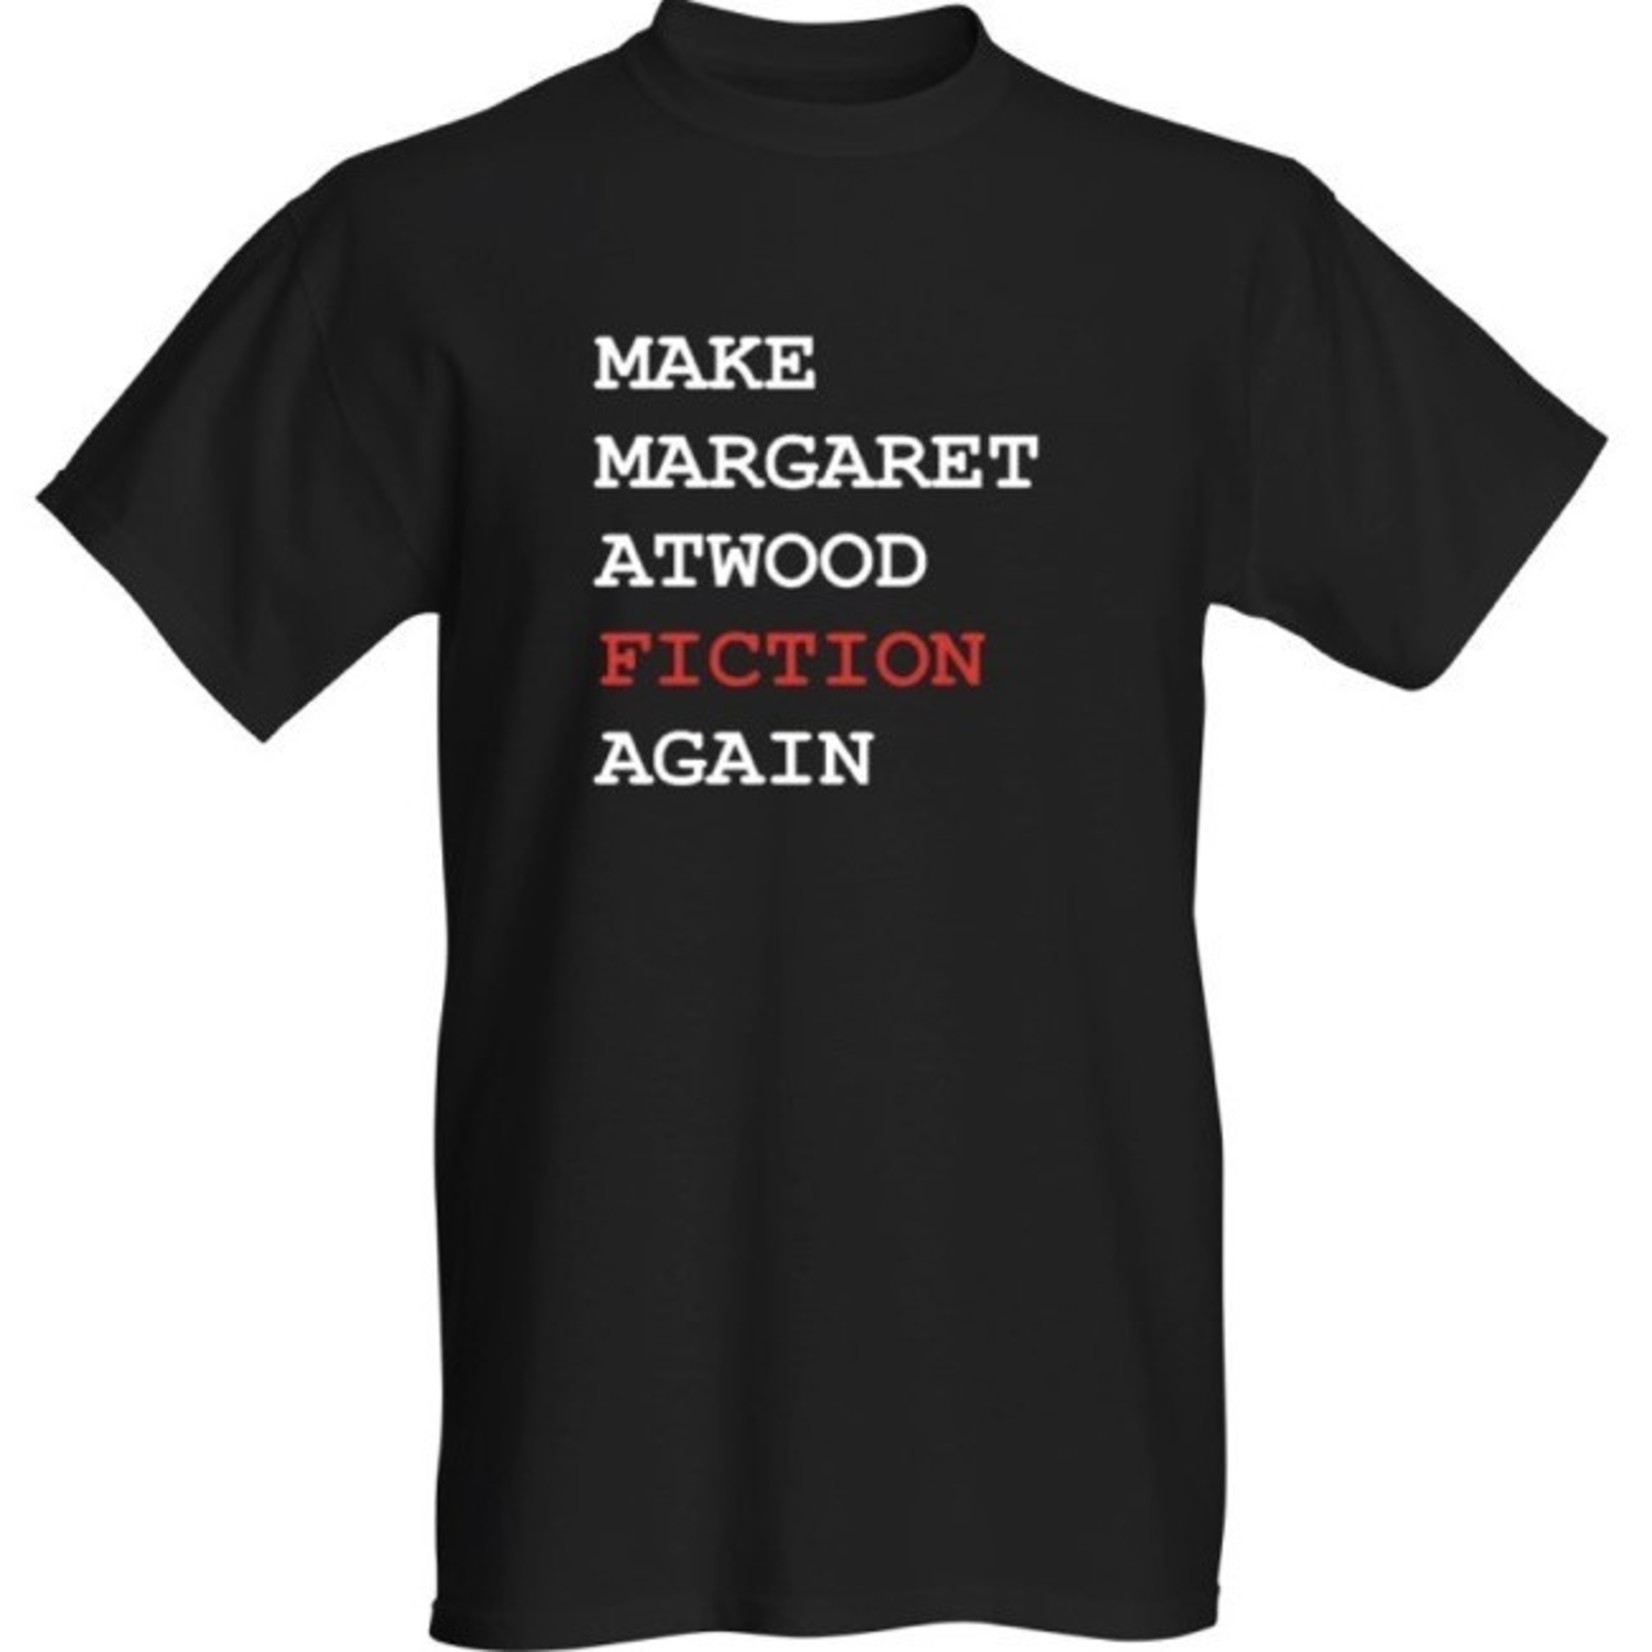 Bad Annie’s T-Shirt - Make Margaret Atwood Fiction Again